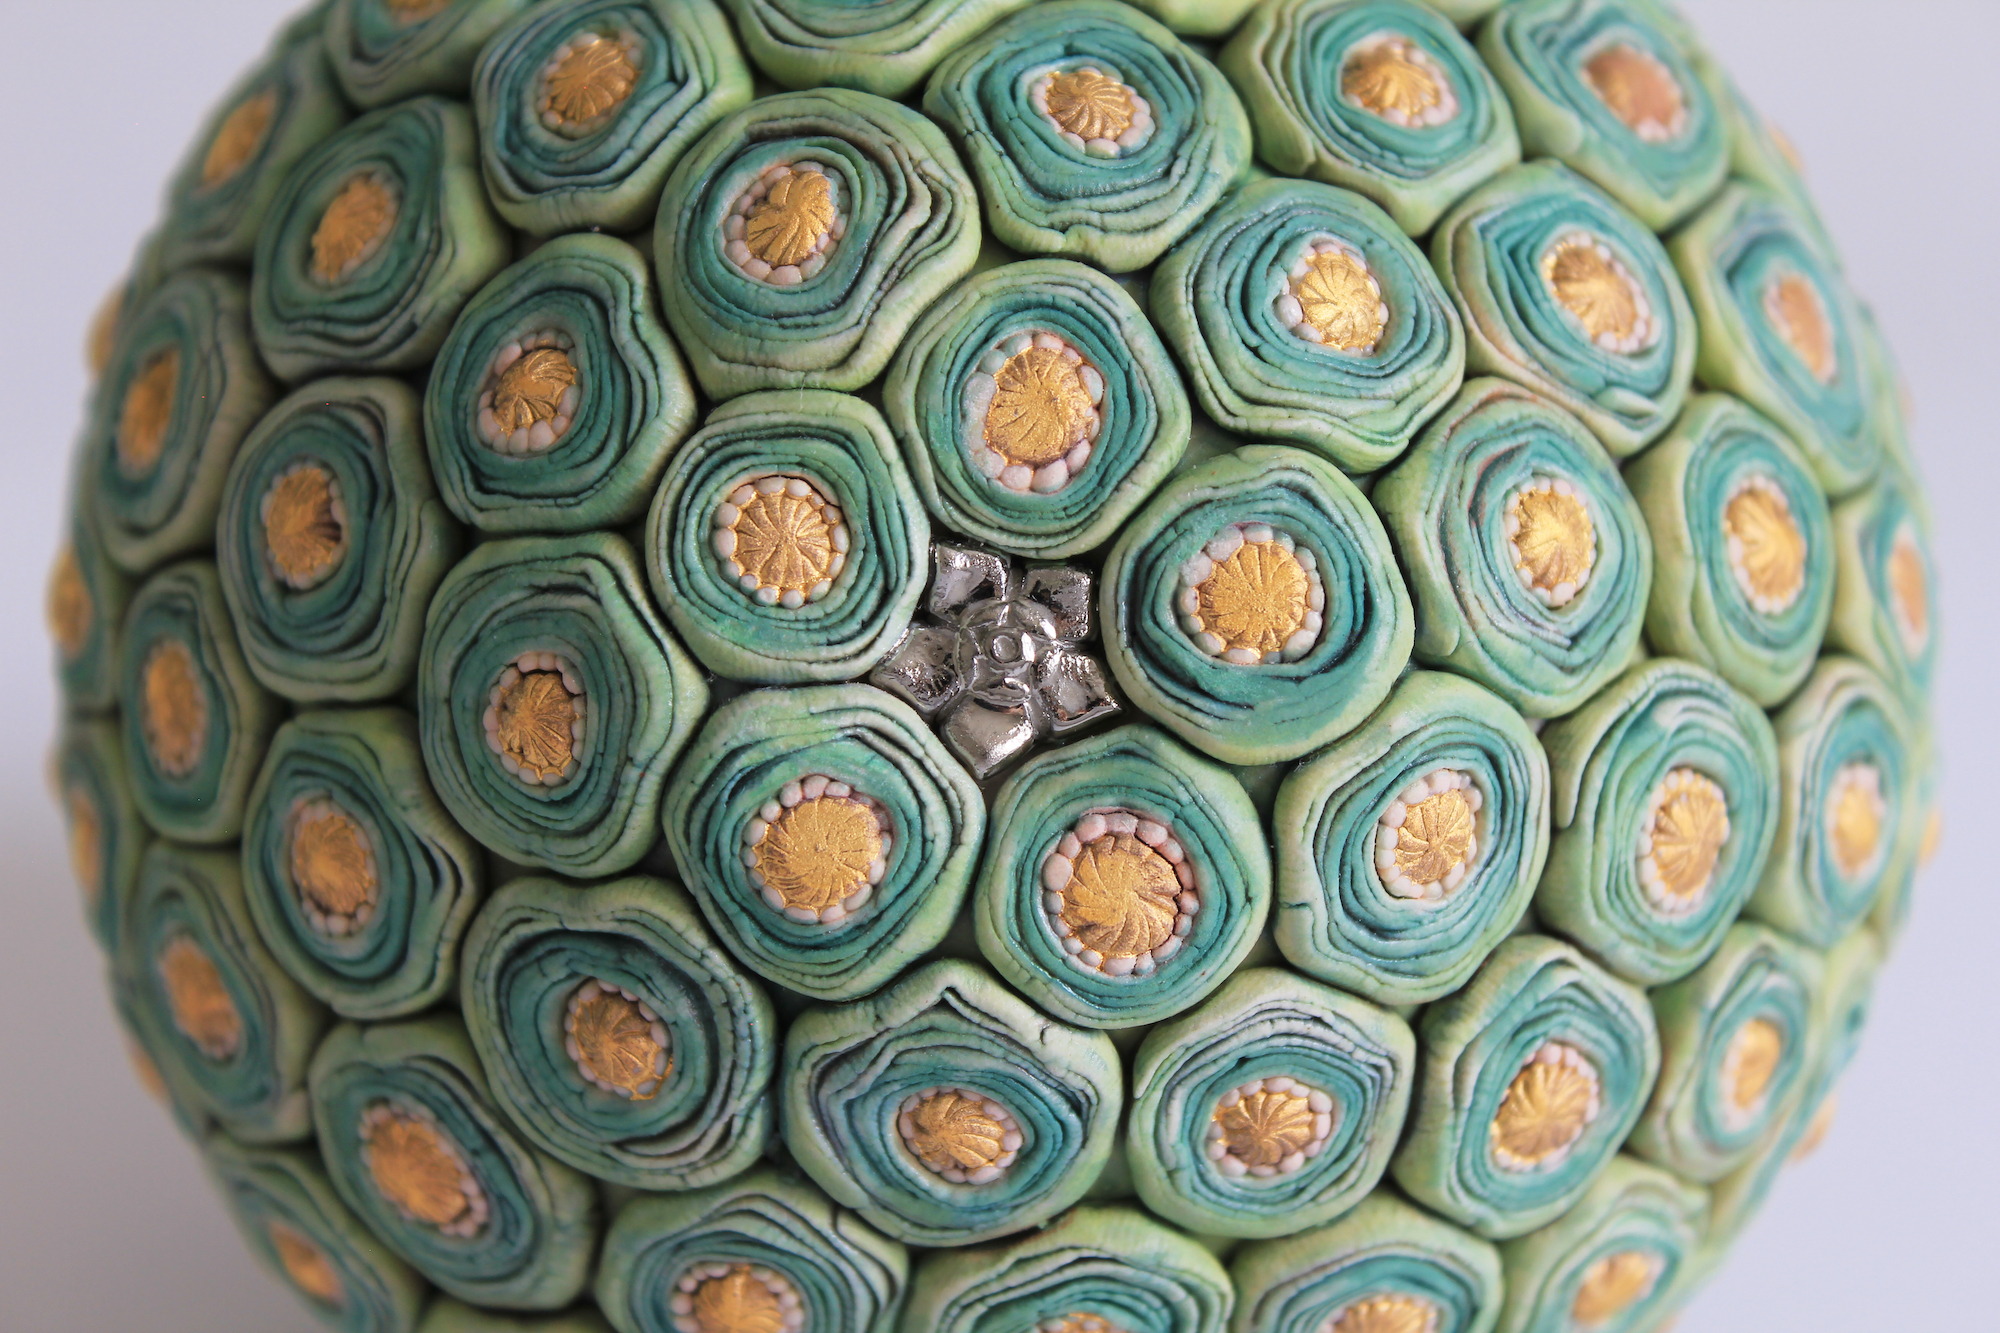 A detail of the base of a ceramic sculpture with details that resemble cut Brussels sprouts, tiny cabbages, or flowers.